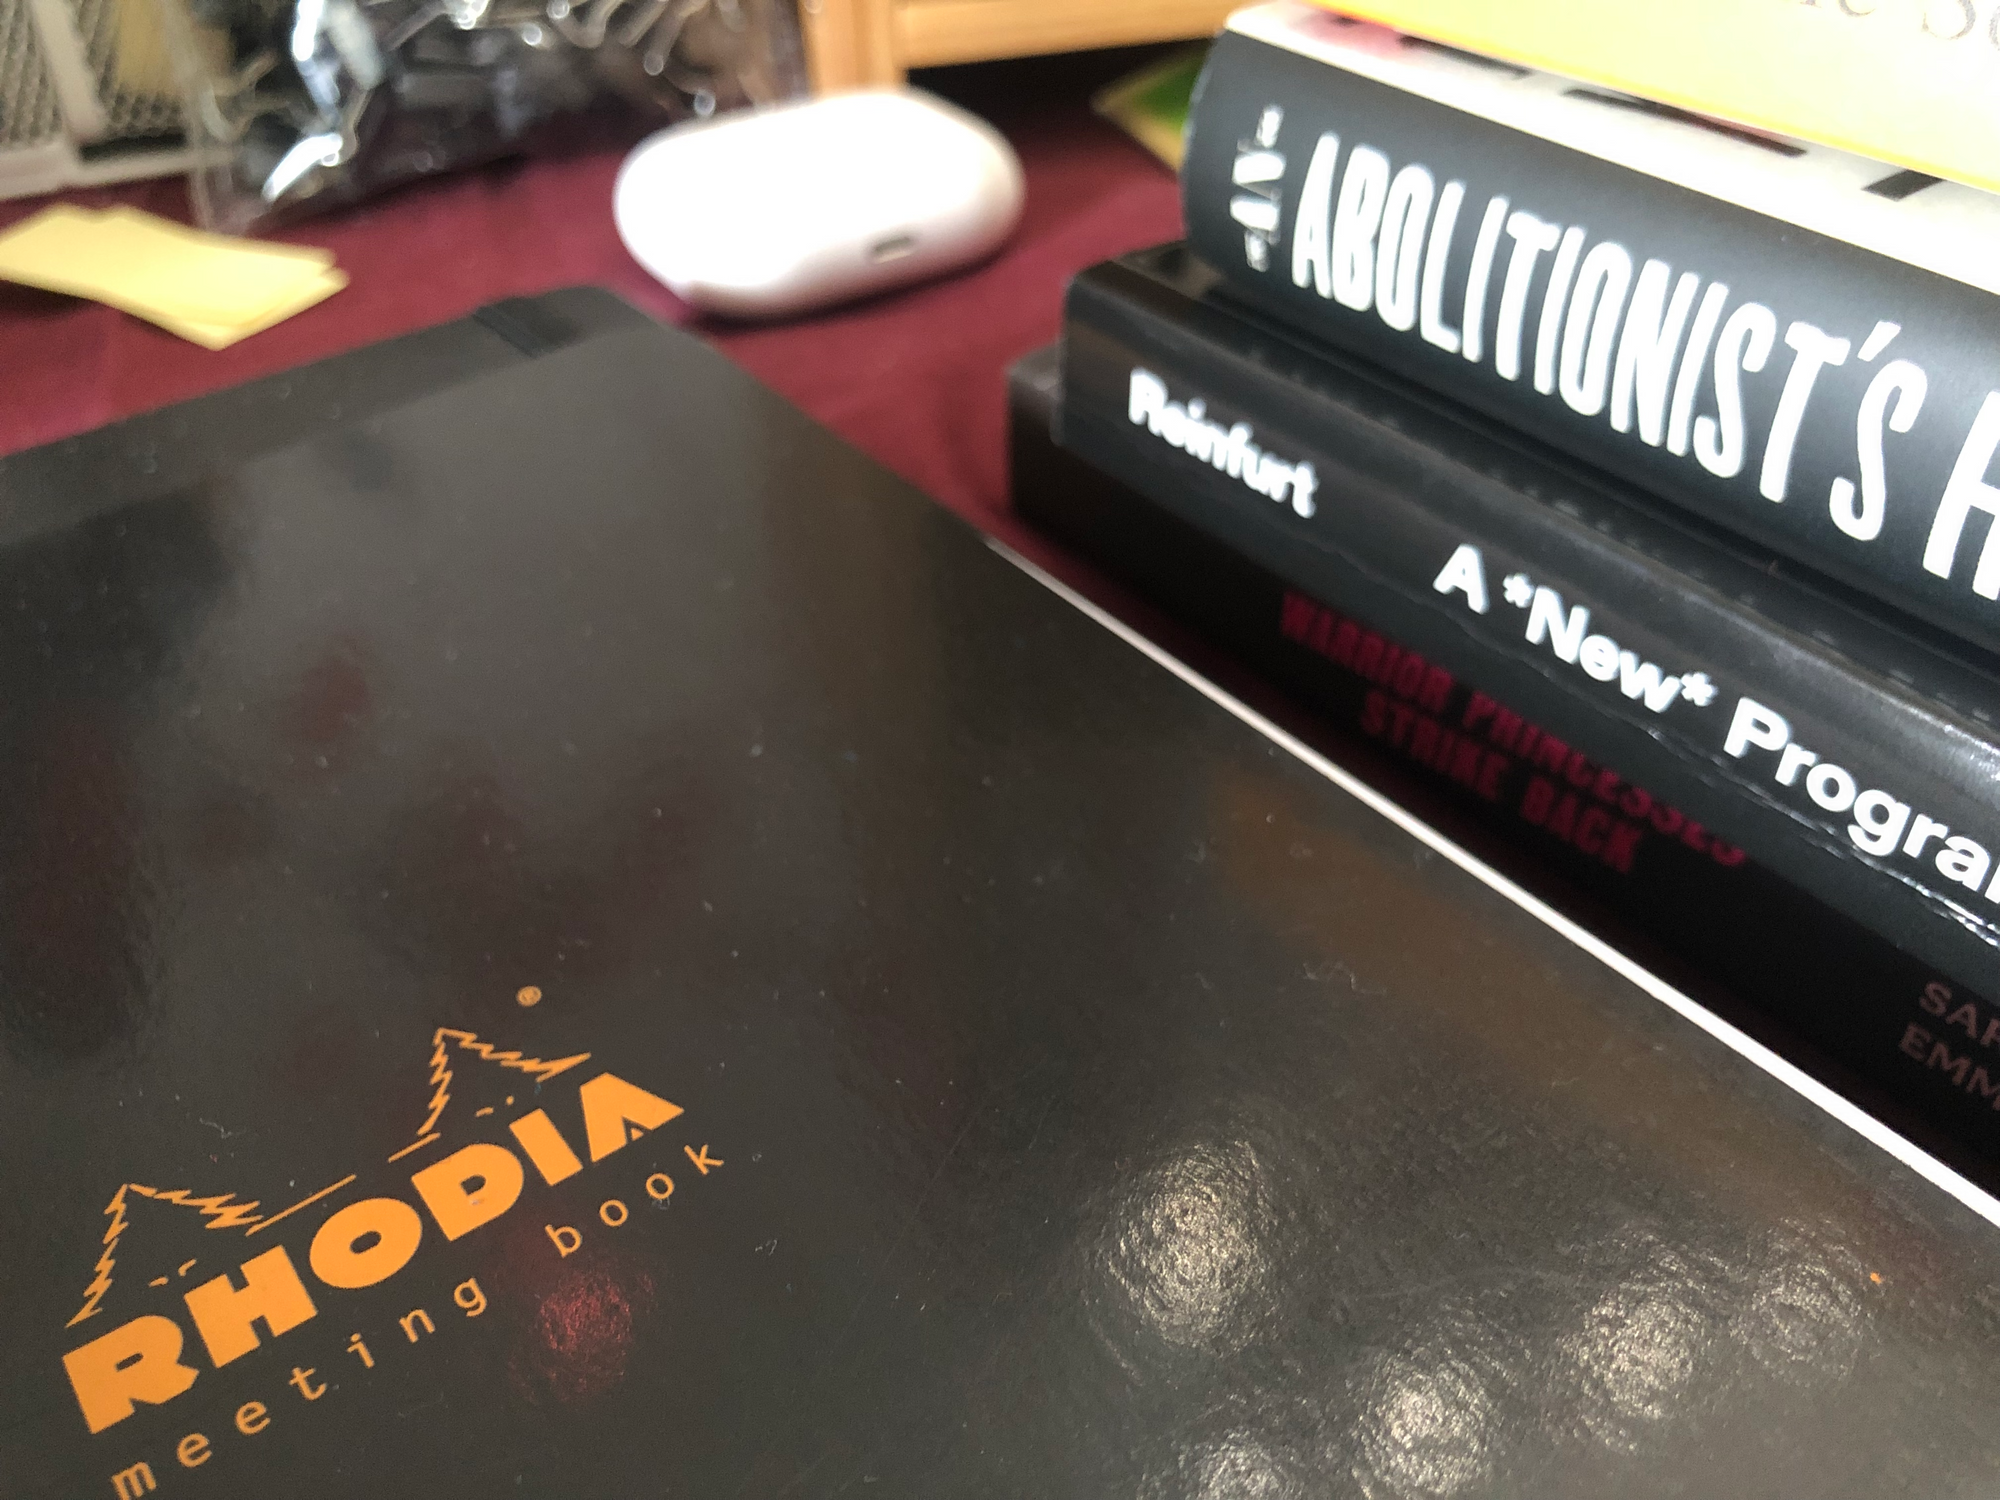 photo of a black Rhodia notebook next to a stack of books, spines partially visible, the top one reading "AN ABOLITIONIST'S", the second "Reinfurt A *New* Program", the third "WARRIOR PRINCESSES STRIKE BACK". AirPods Pro in the background beside a bag of binder clips. taken at the robledo art, strike! headquarters, february 2023.